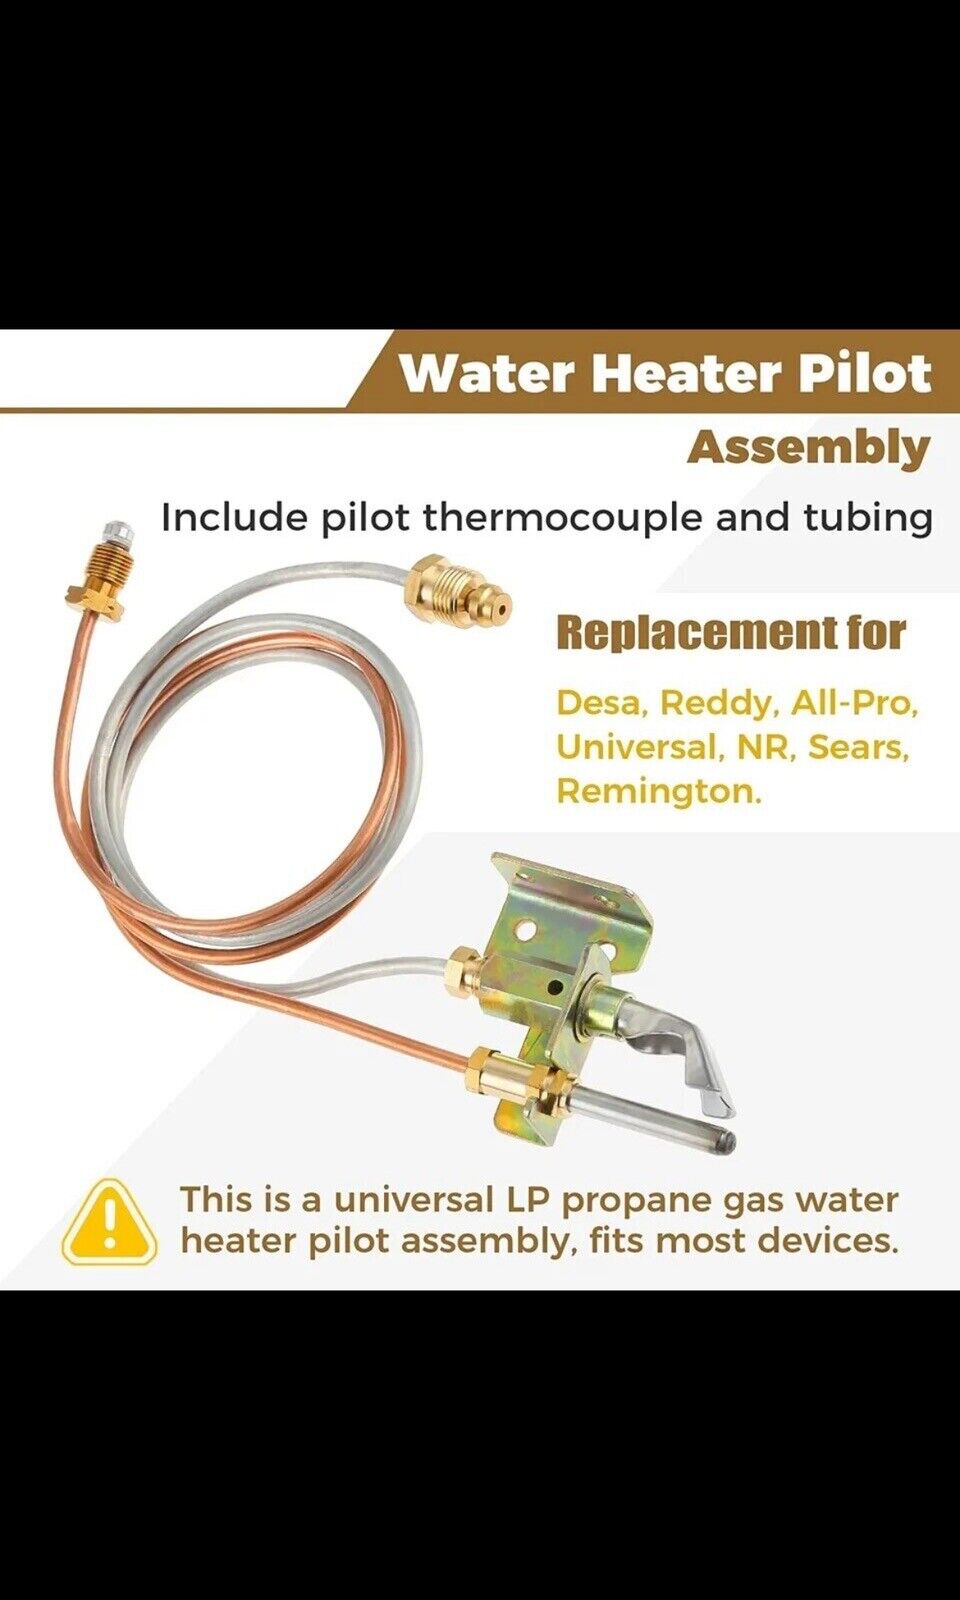 Water Heater Pilot Assembely With Pilot Thermocouple and Tubing Natural Gas.